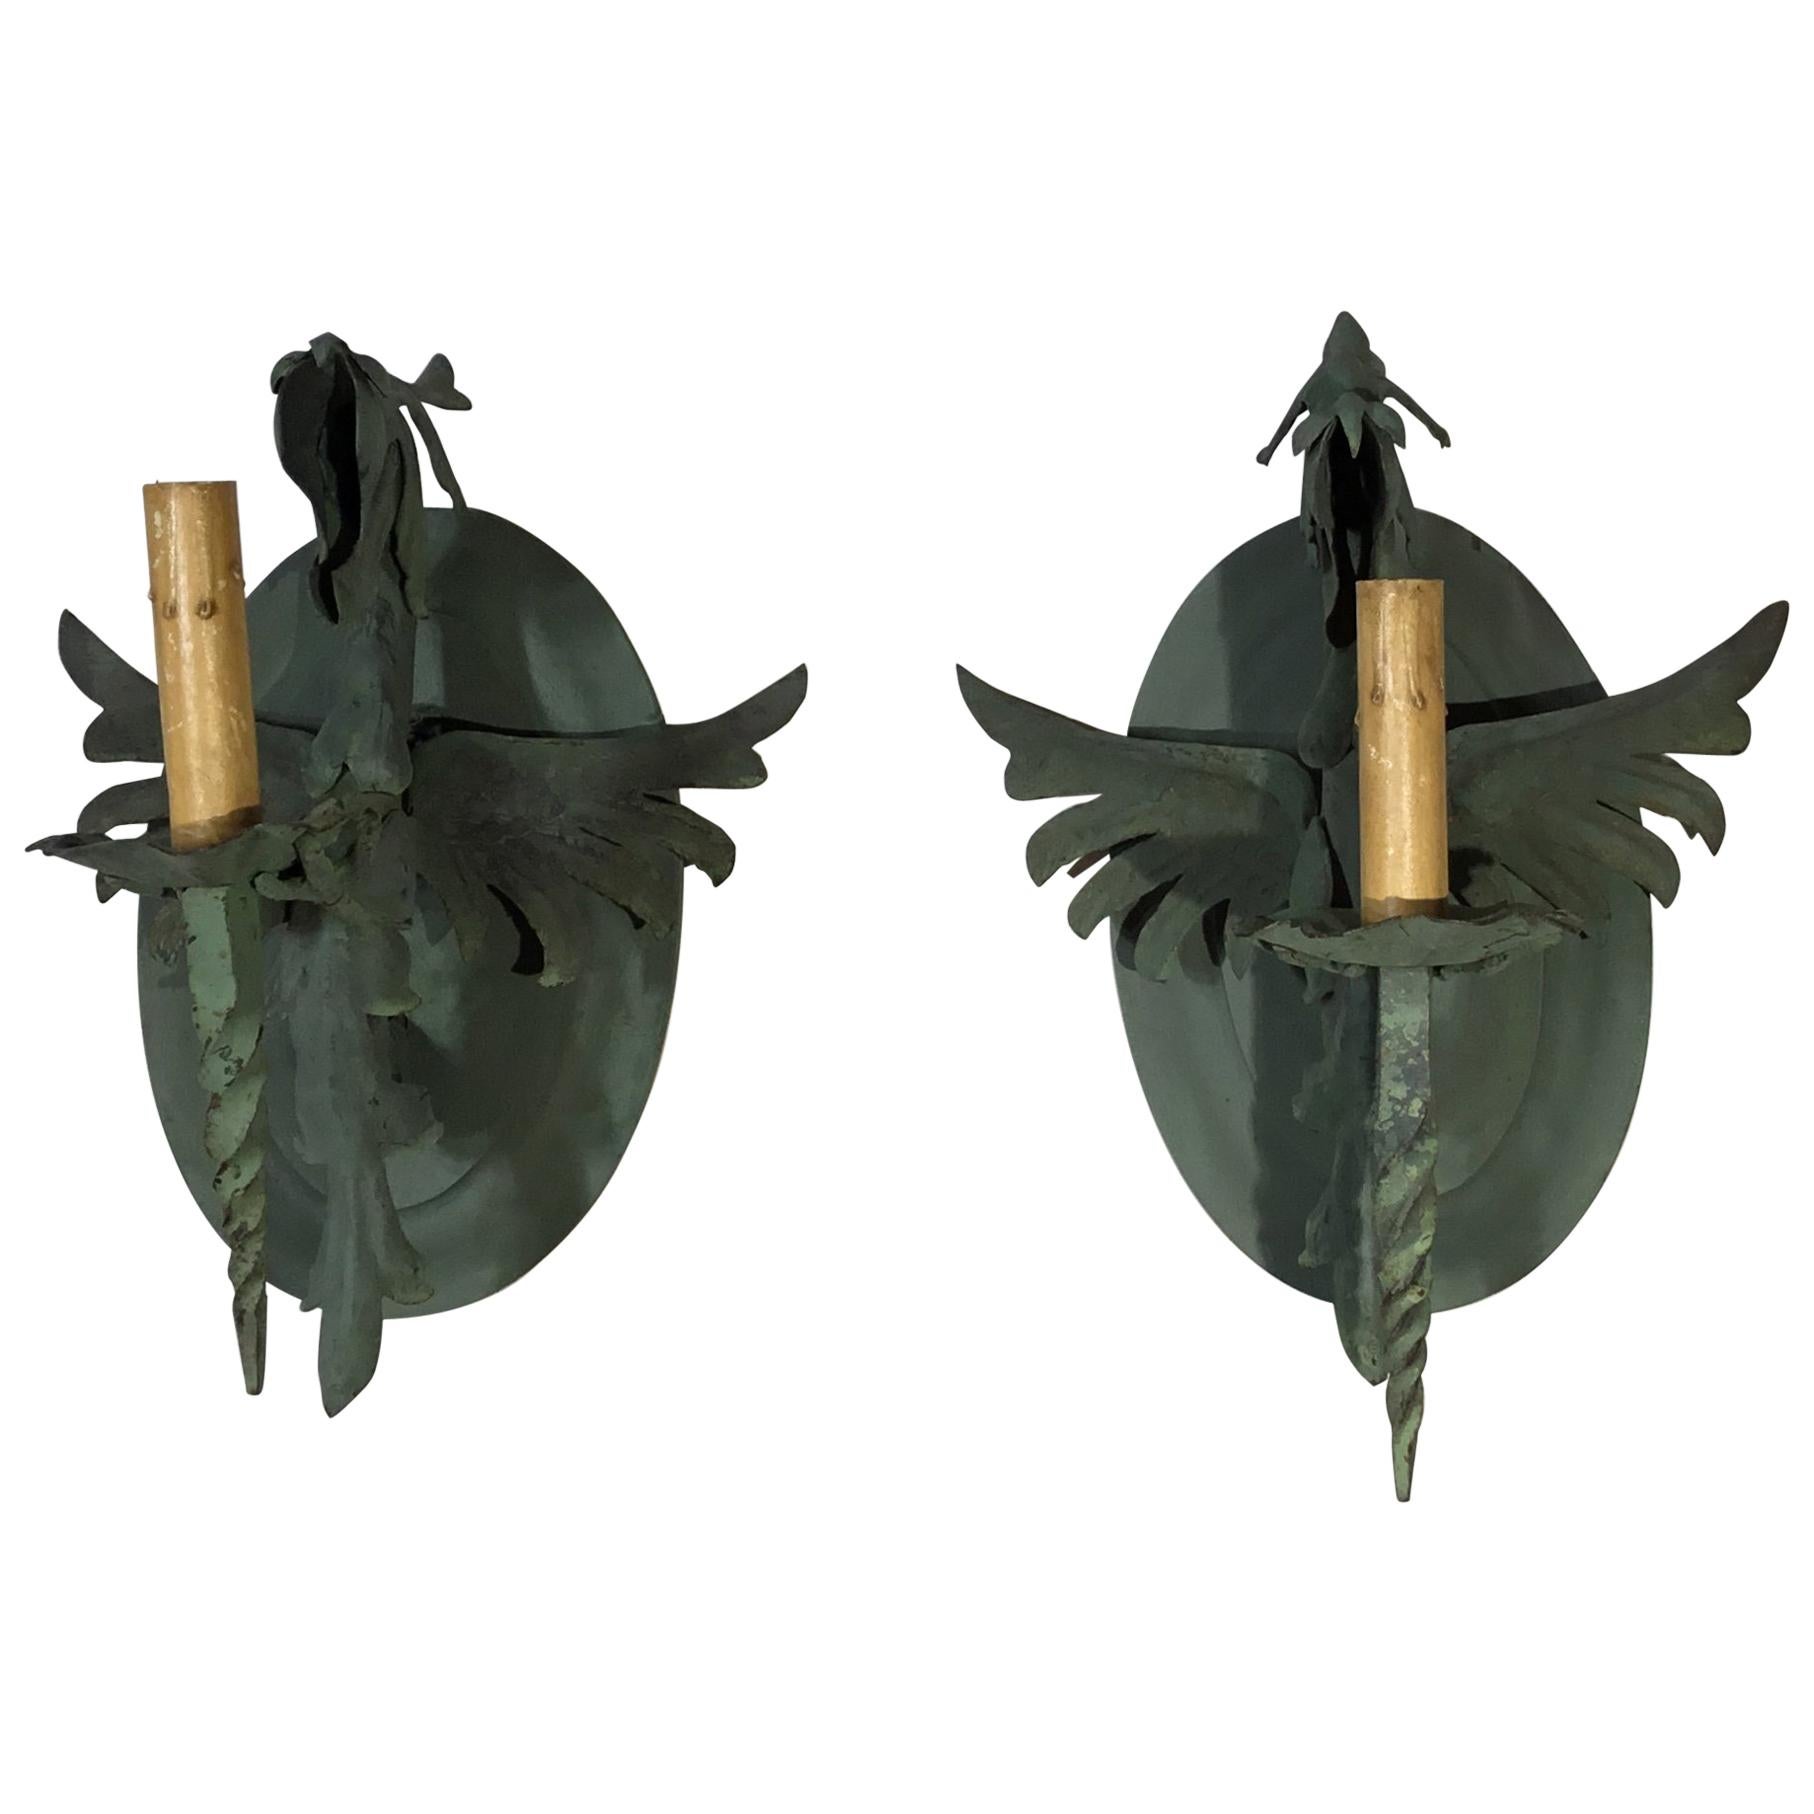 Pair of vintage Wrought Iron Wall Sconces